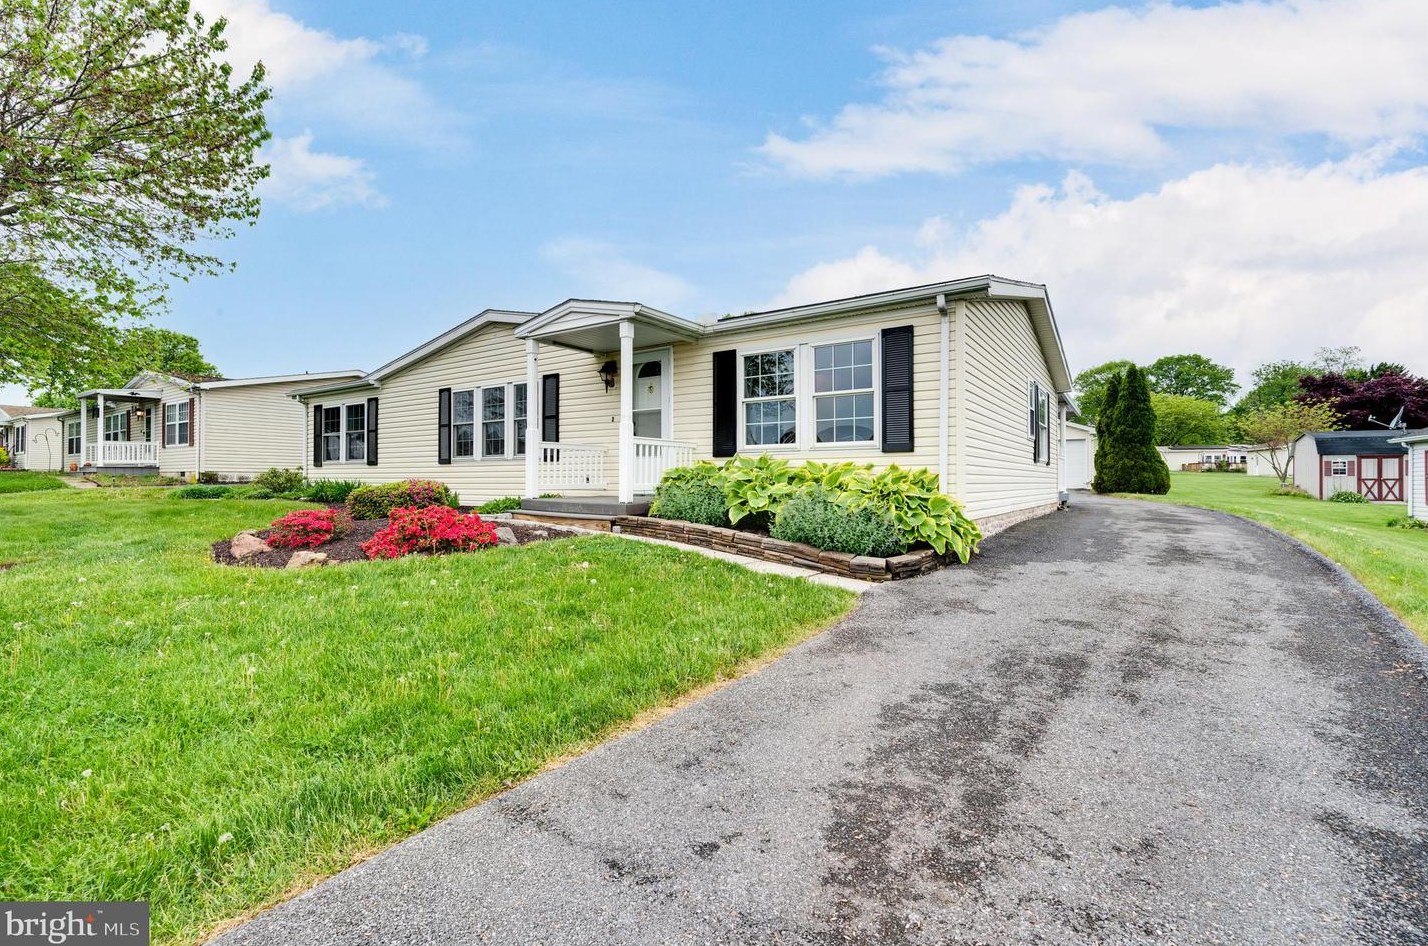 17 Ray Dr, Fivepointville, PA 17517